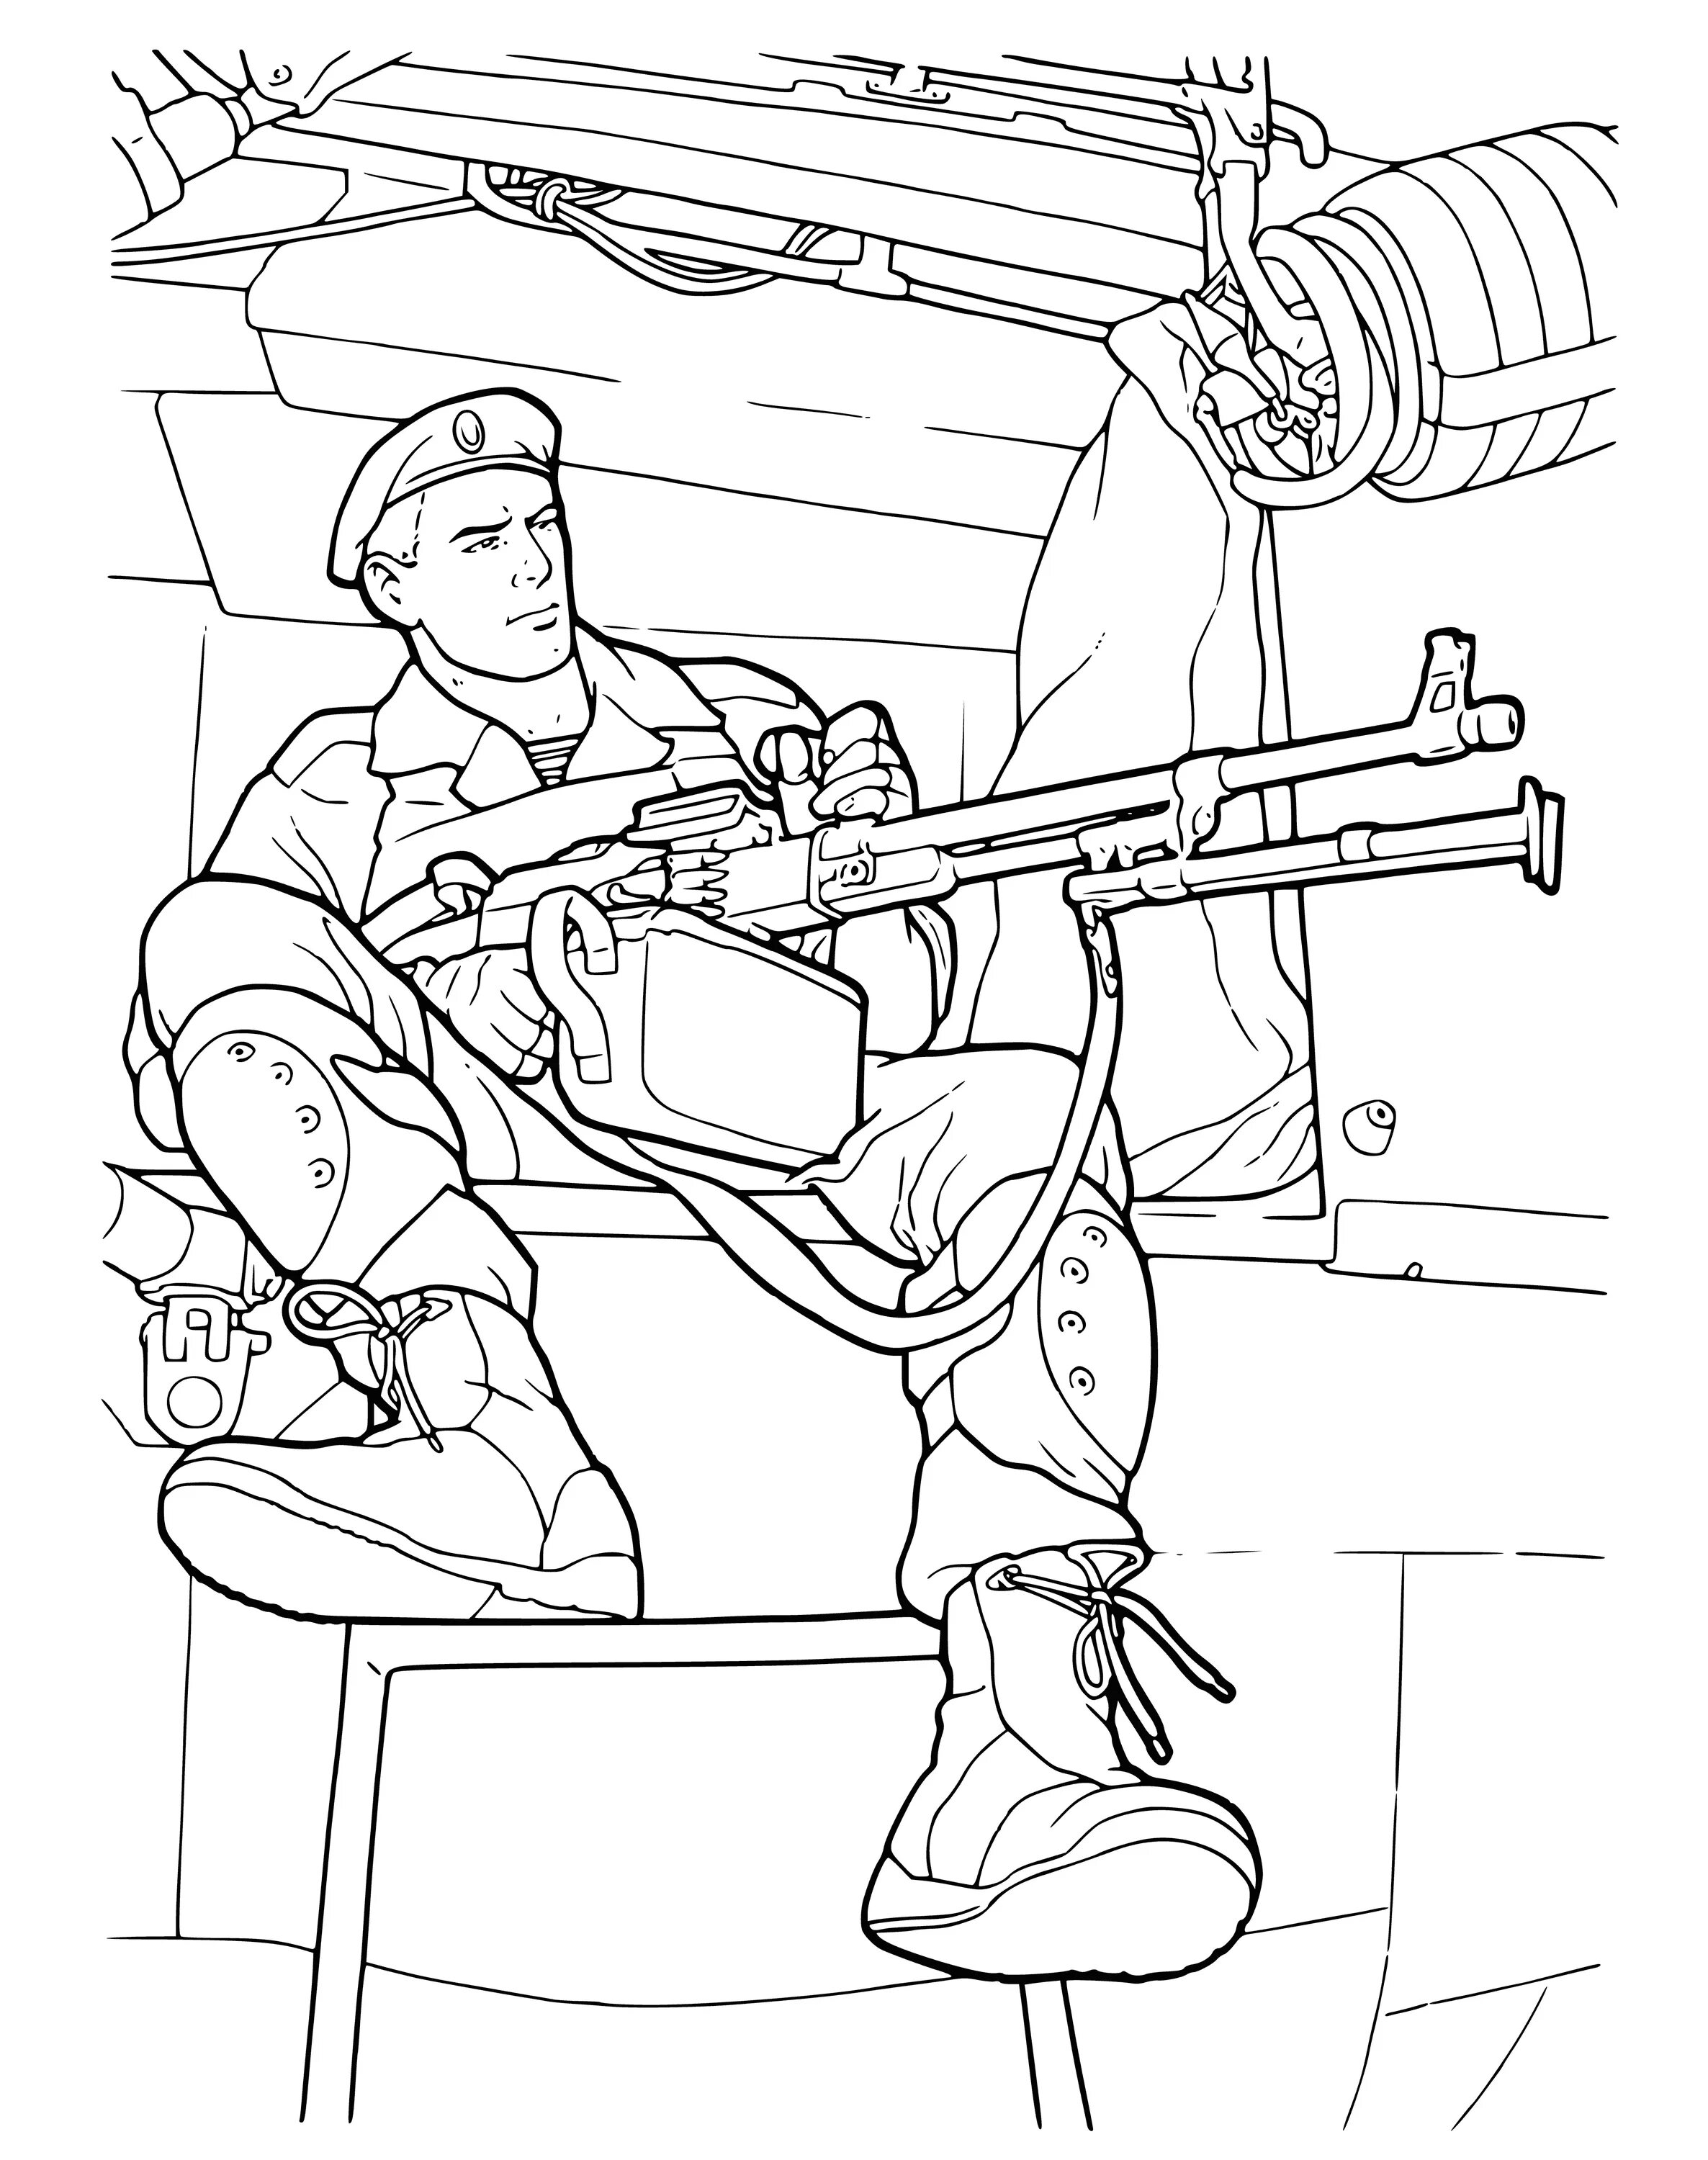 Exciting Russian soldier coloring book for kids